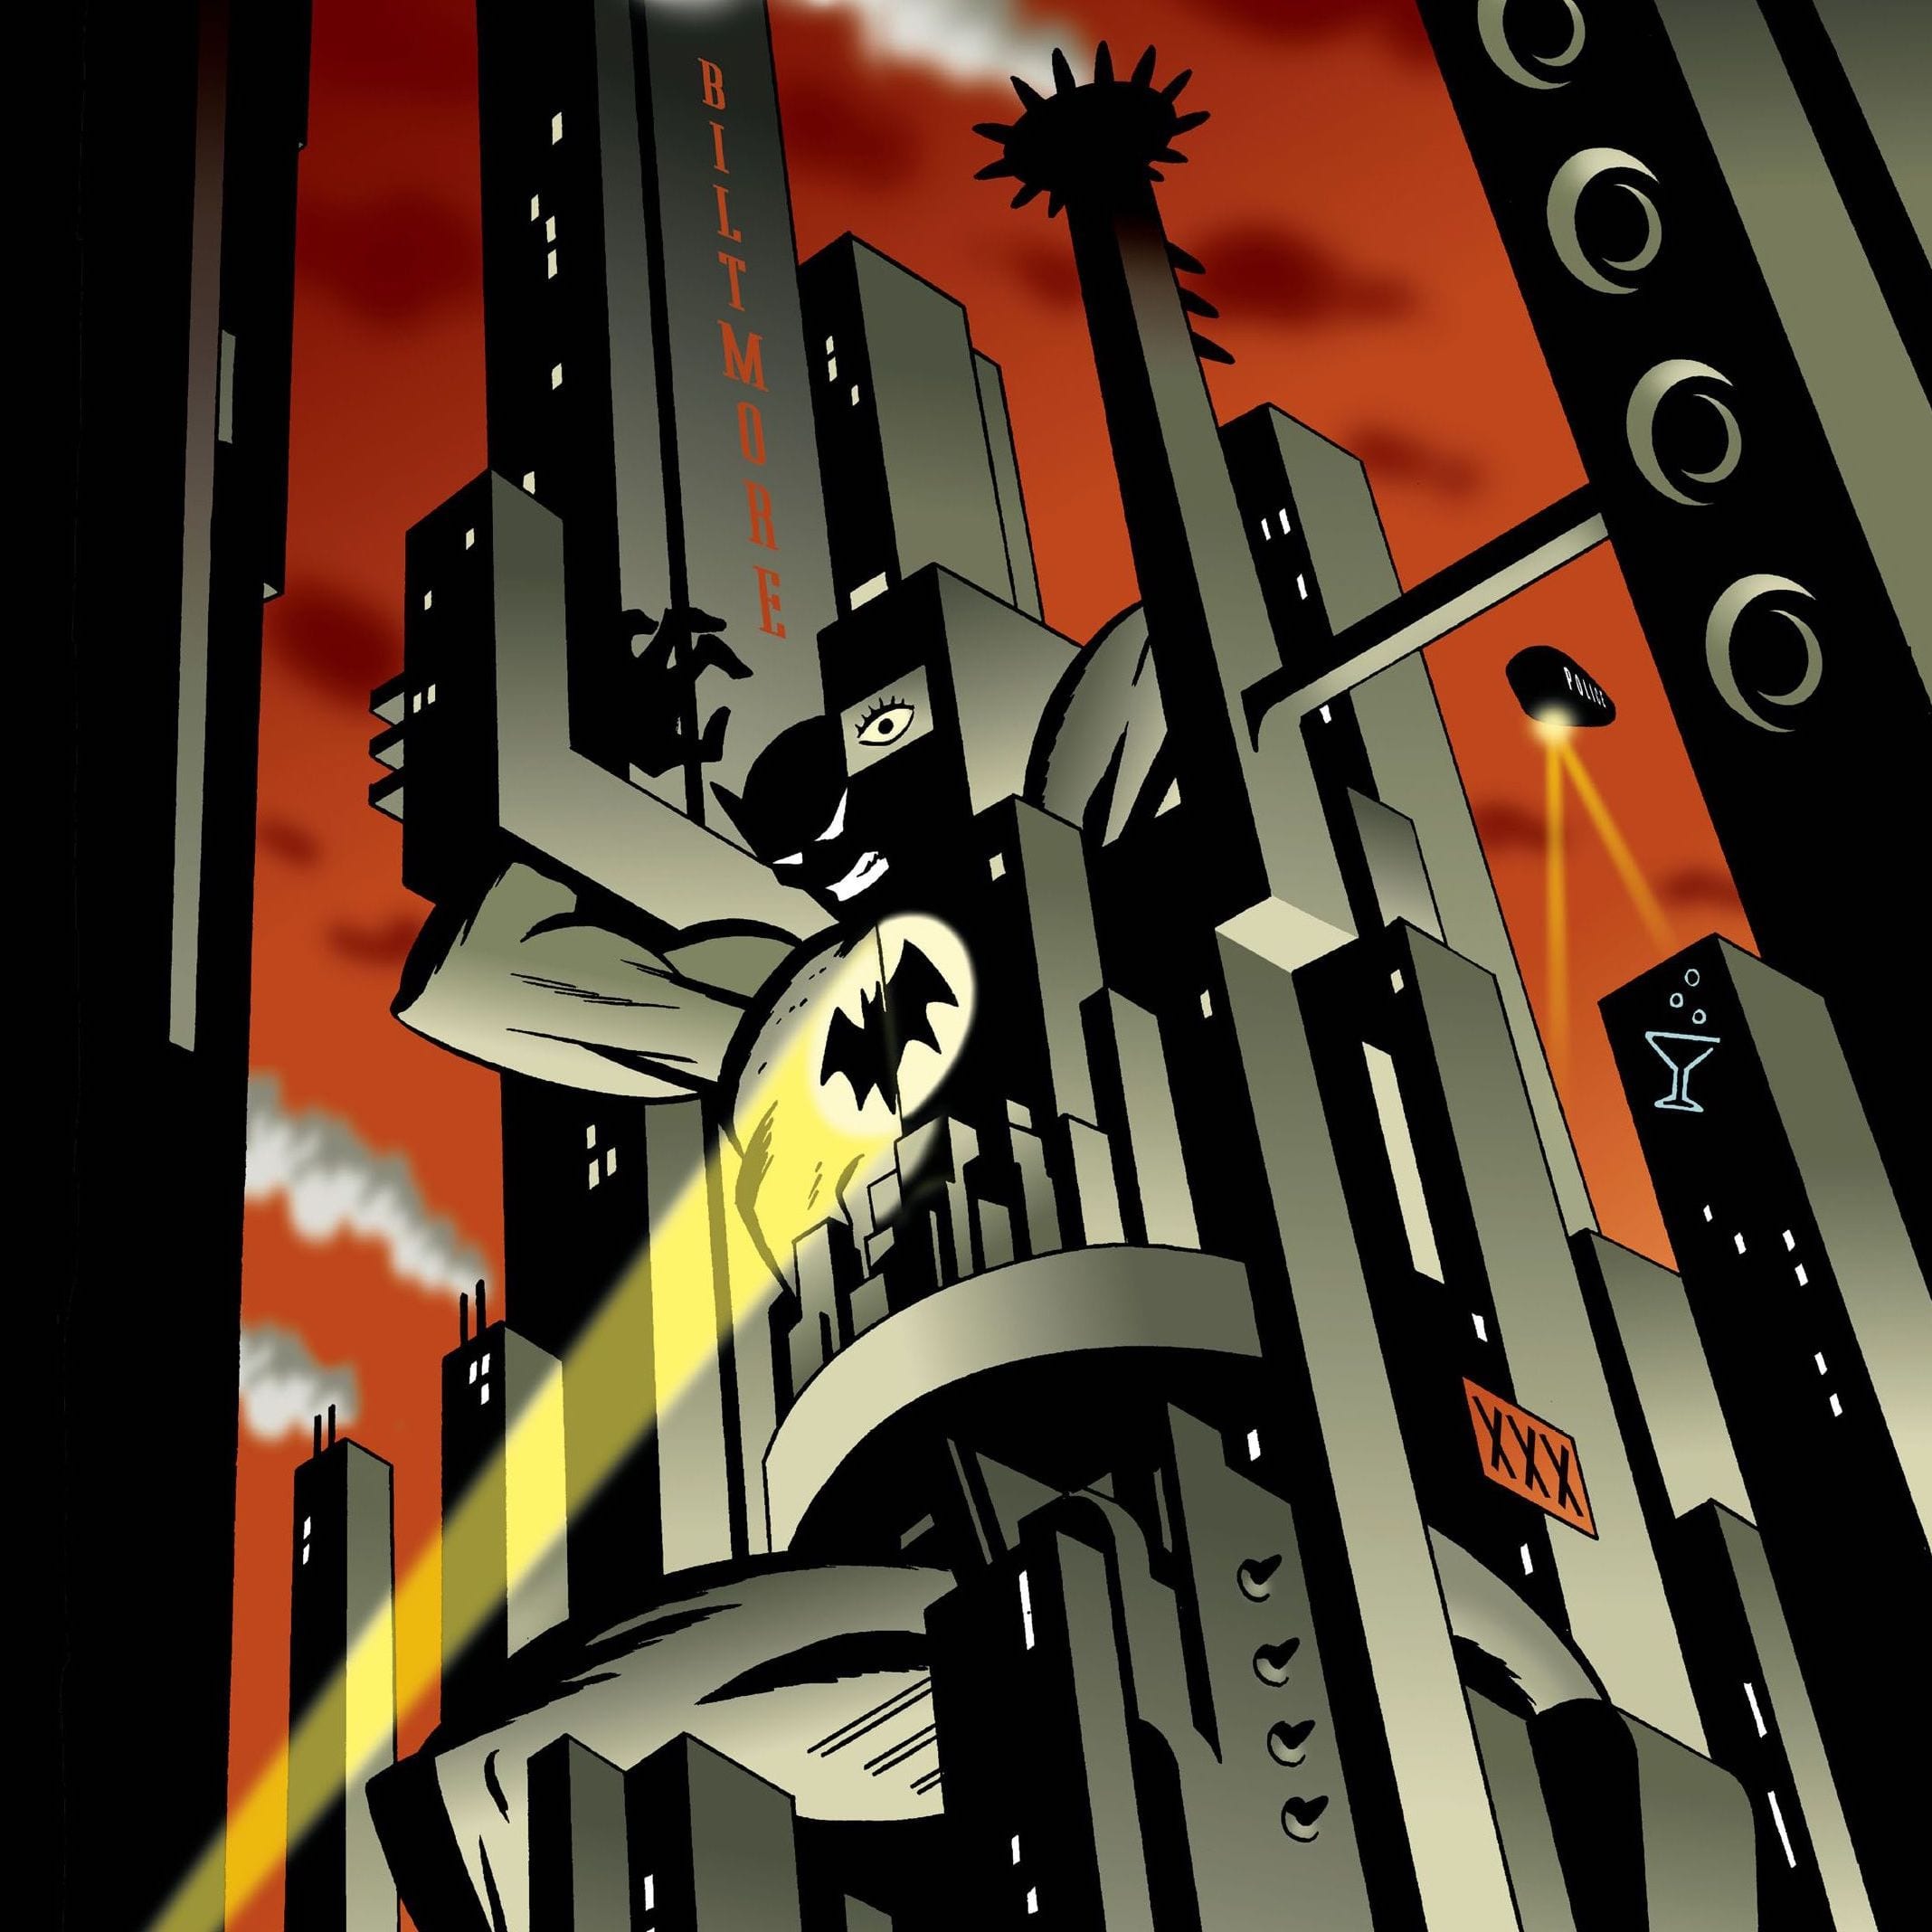 Batman: Ego, the review of the comic that inspired the movie The Batman